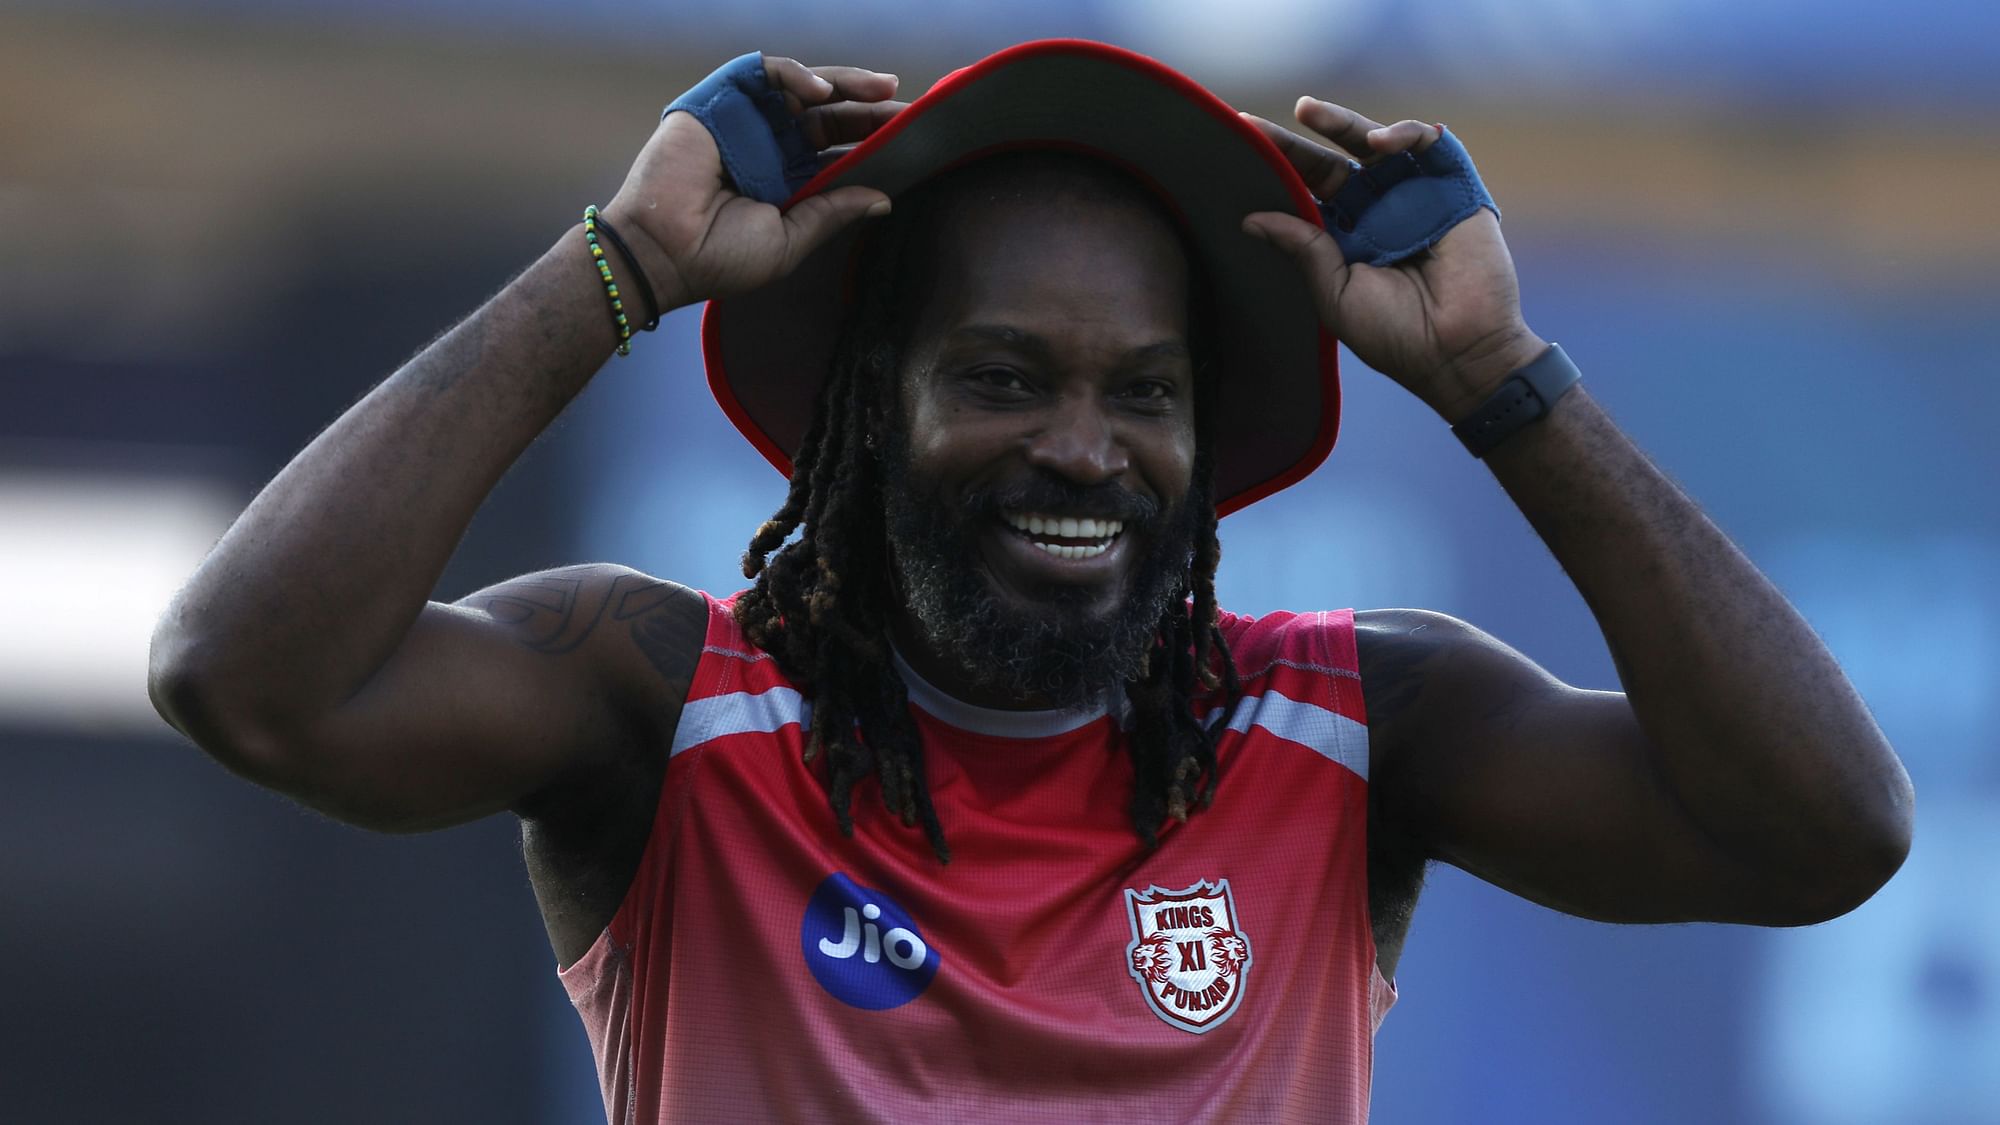 Kings XI Punjab opening batsman Chris Gayle is back on the training ground, having recovered from his stomach bug.